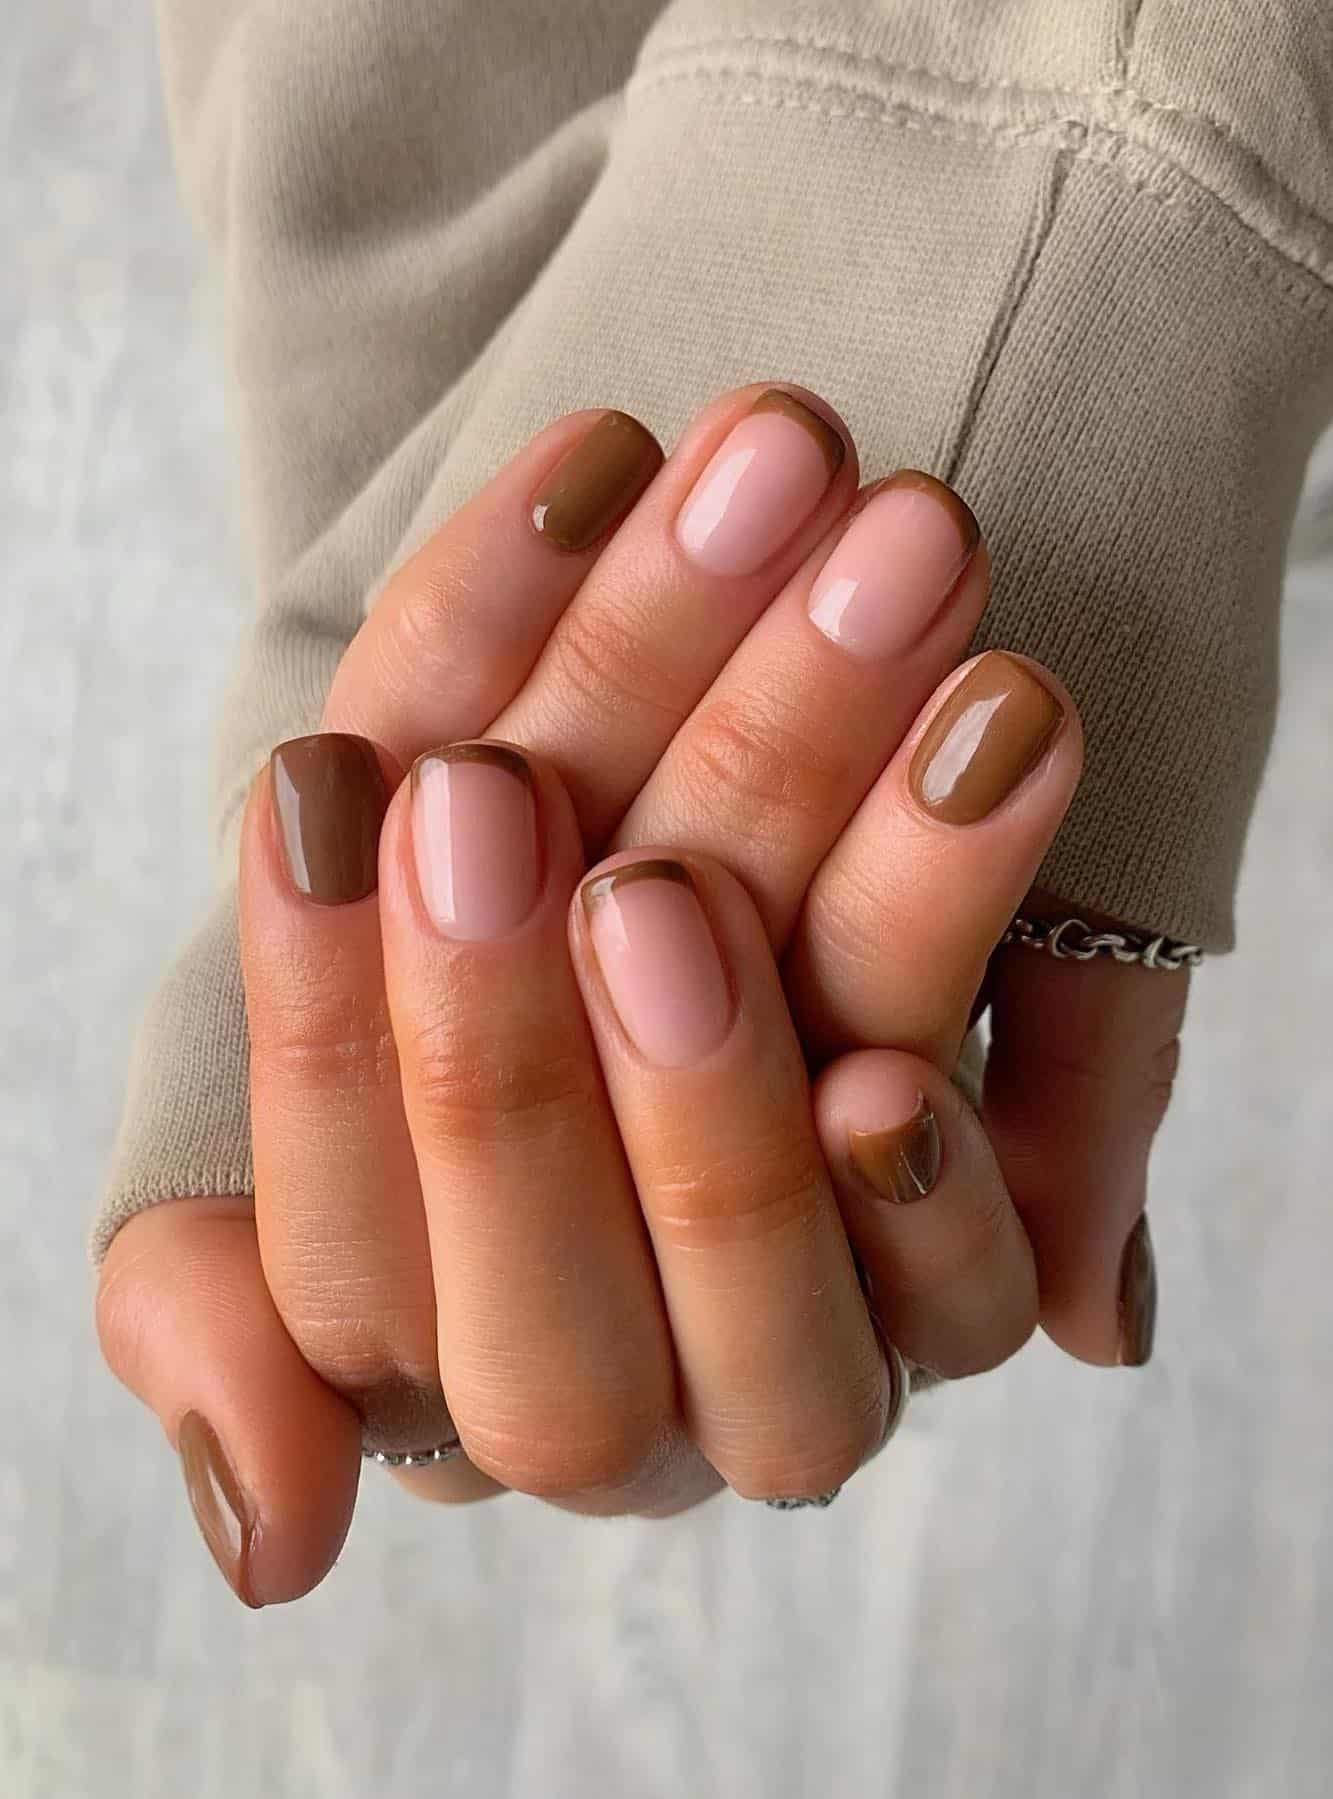 A hand with short squoval nails that have brown French tip accent nails with solid-colored brown nails